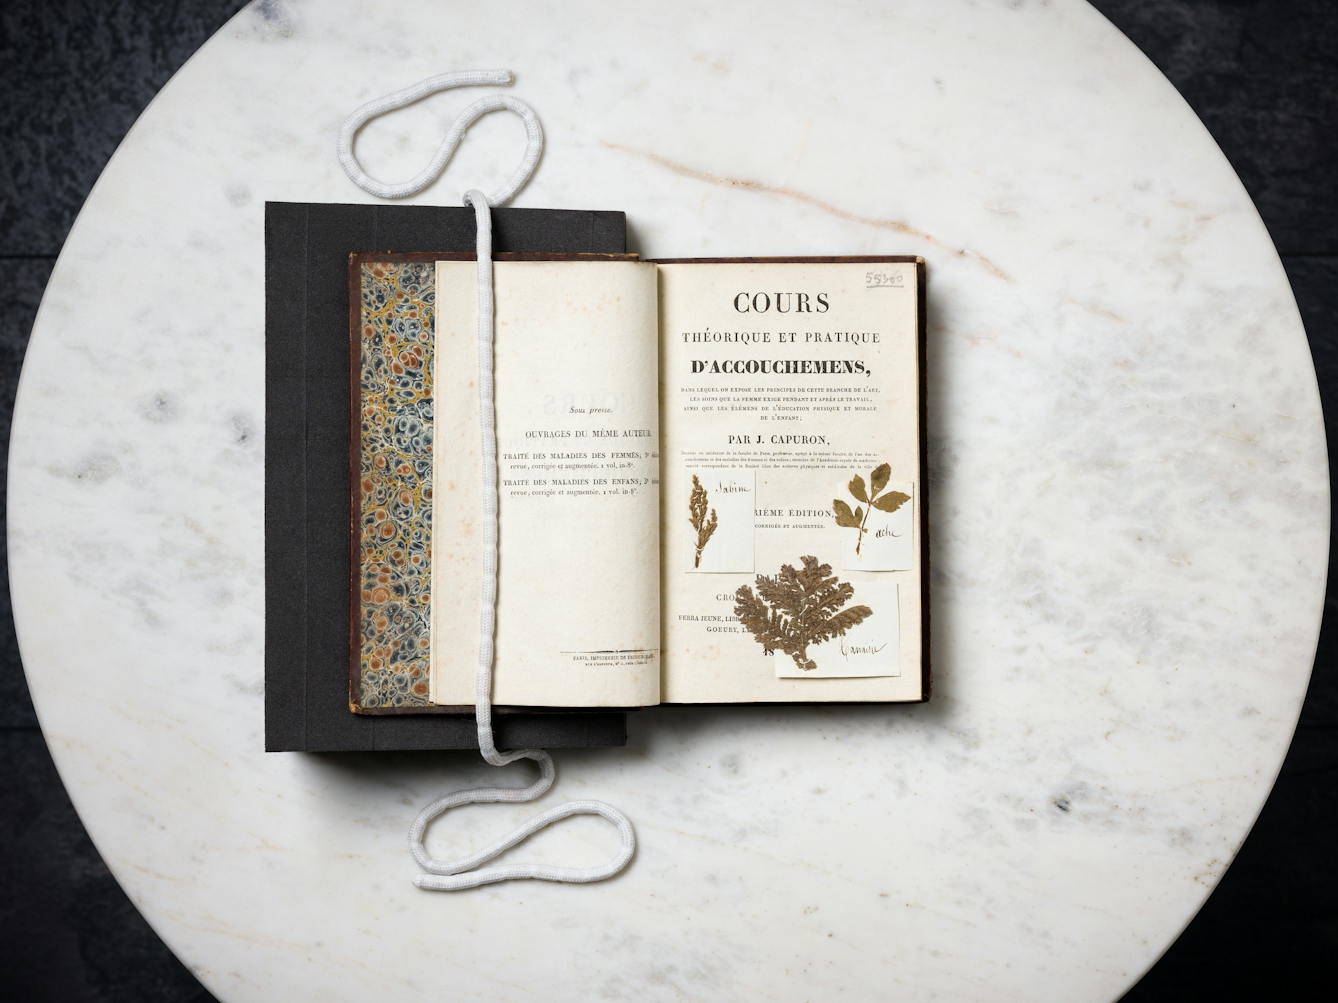 An old book propped open on a marble tabletop, with three pressed plant specimens inside.